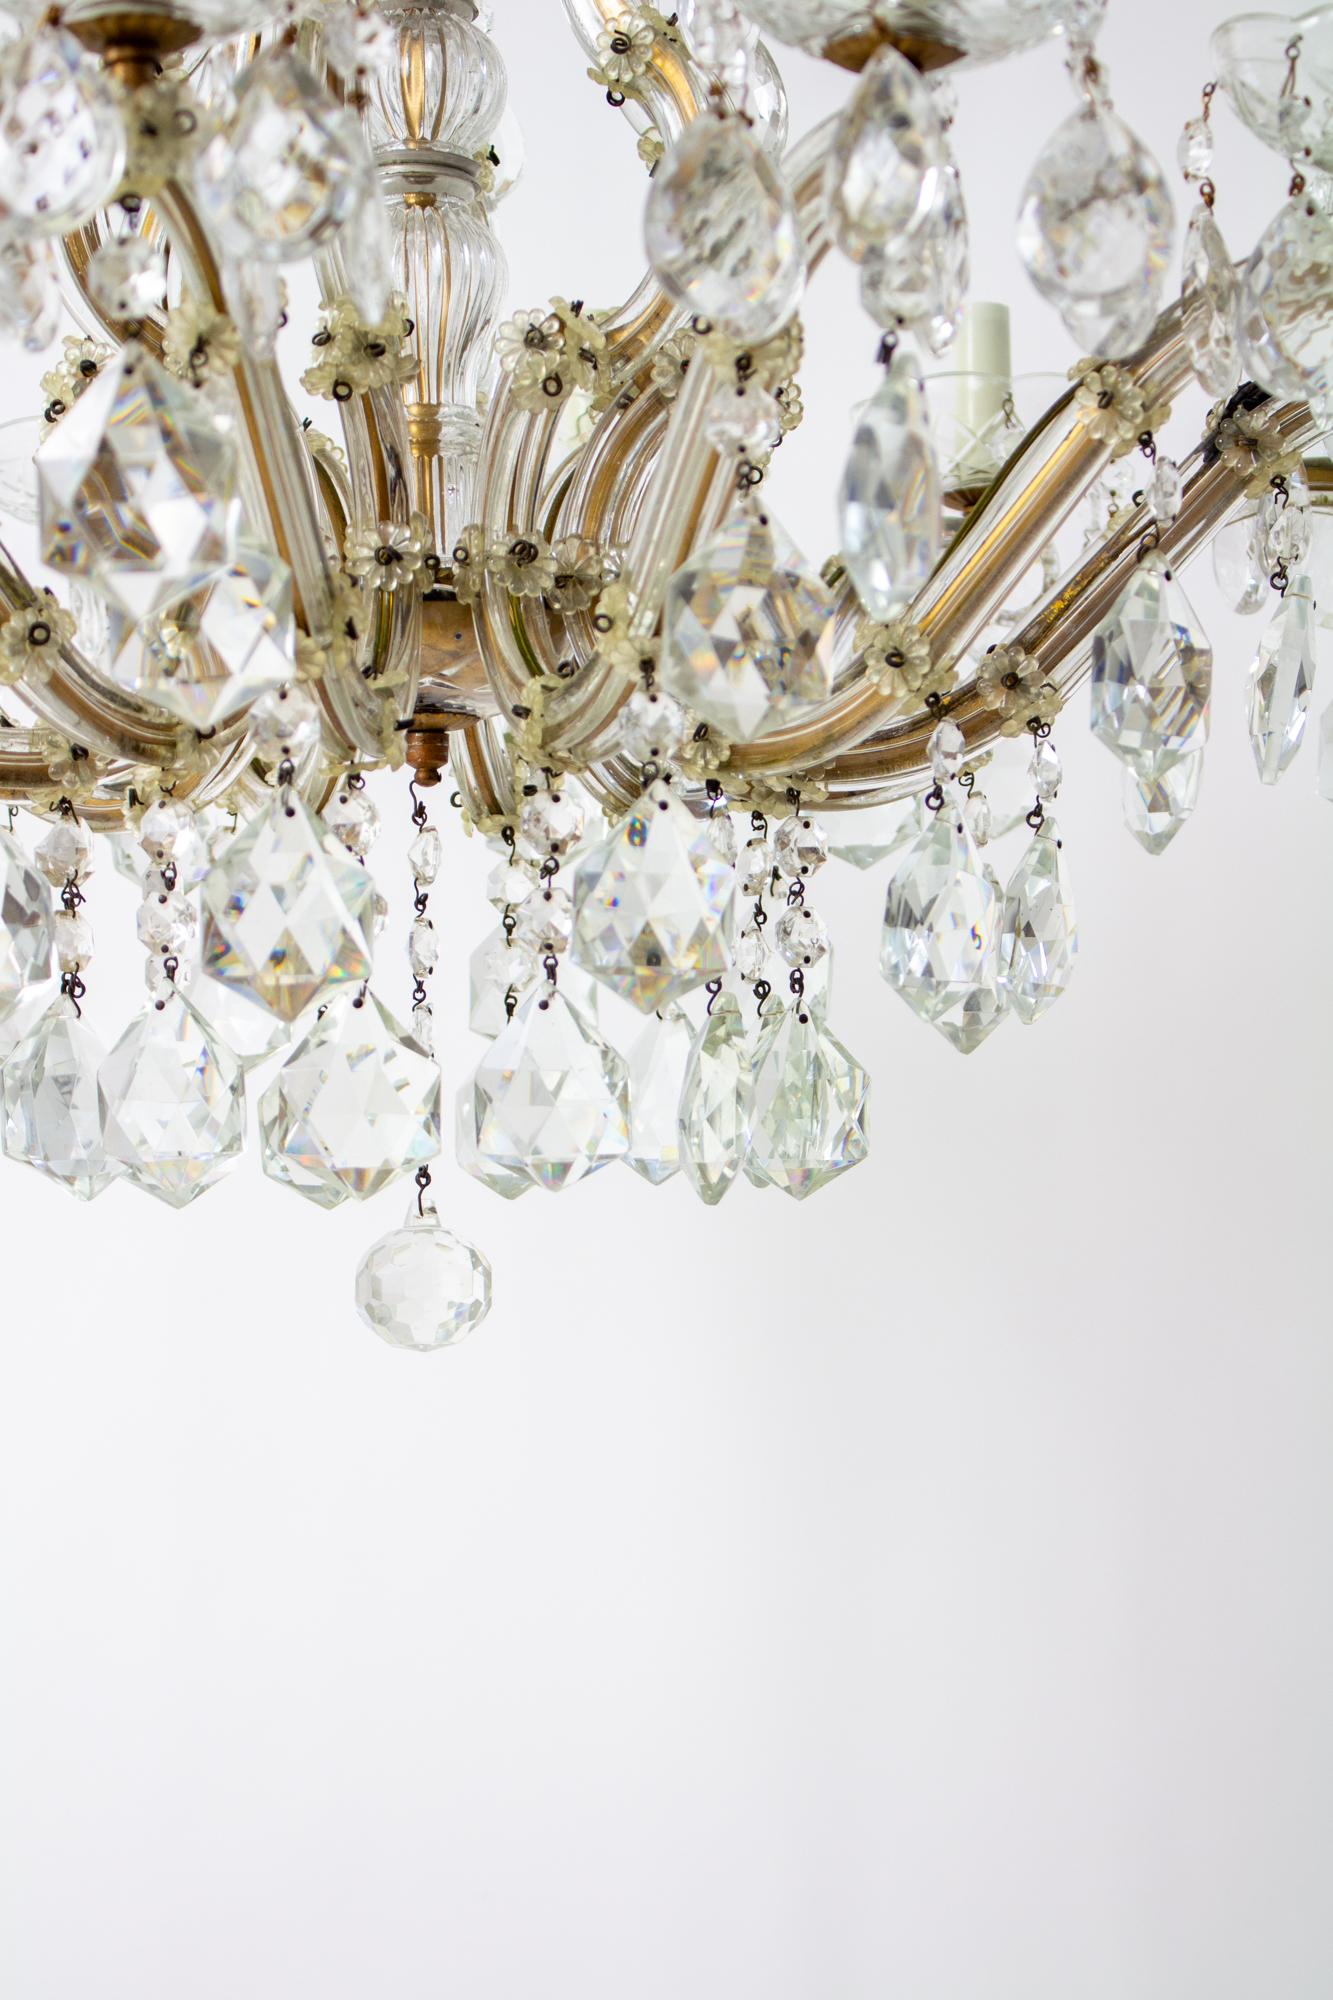 Czech Mid 20th Century Crystal Maria Theresa Chandelier For Sale